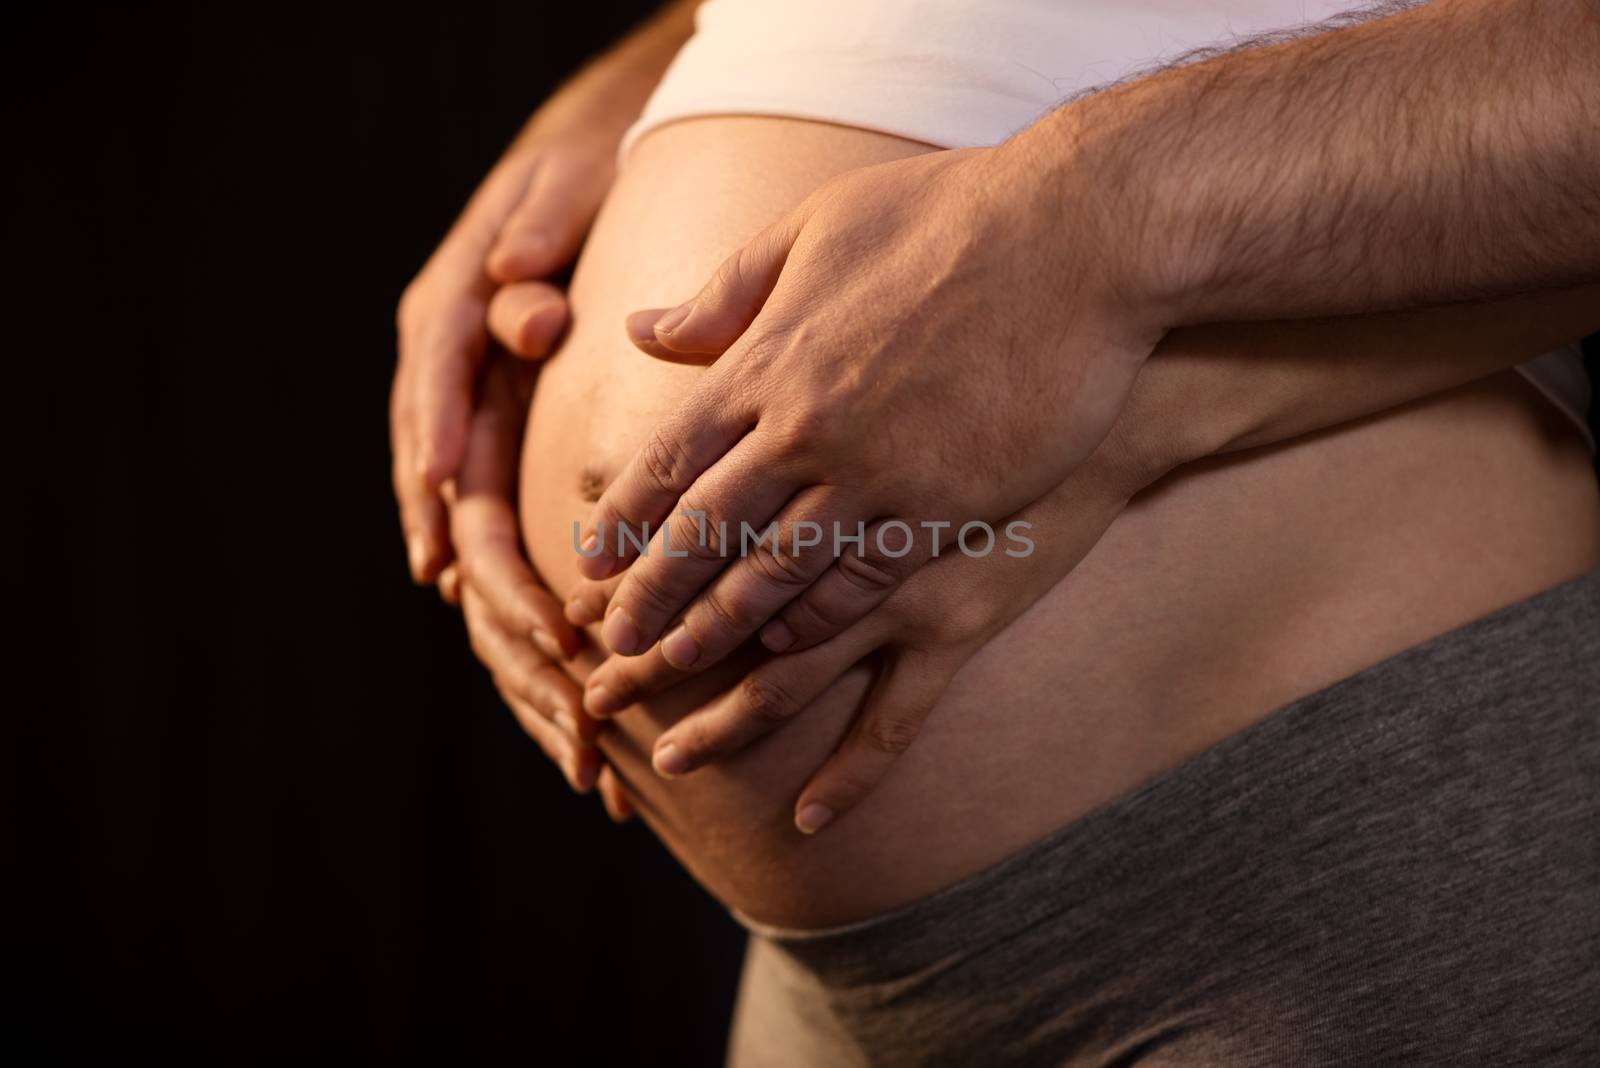 Male And Female Hands On Pregnant Belly by MilanMarkovic78